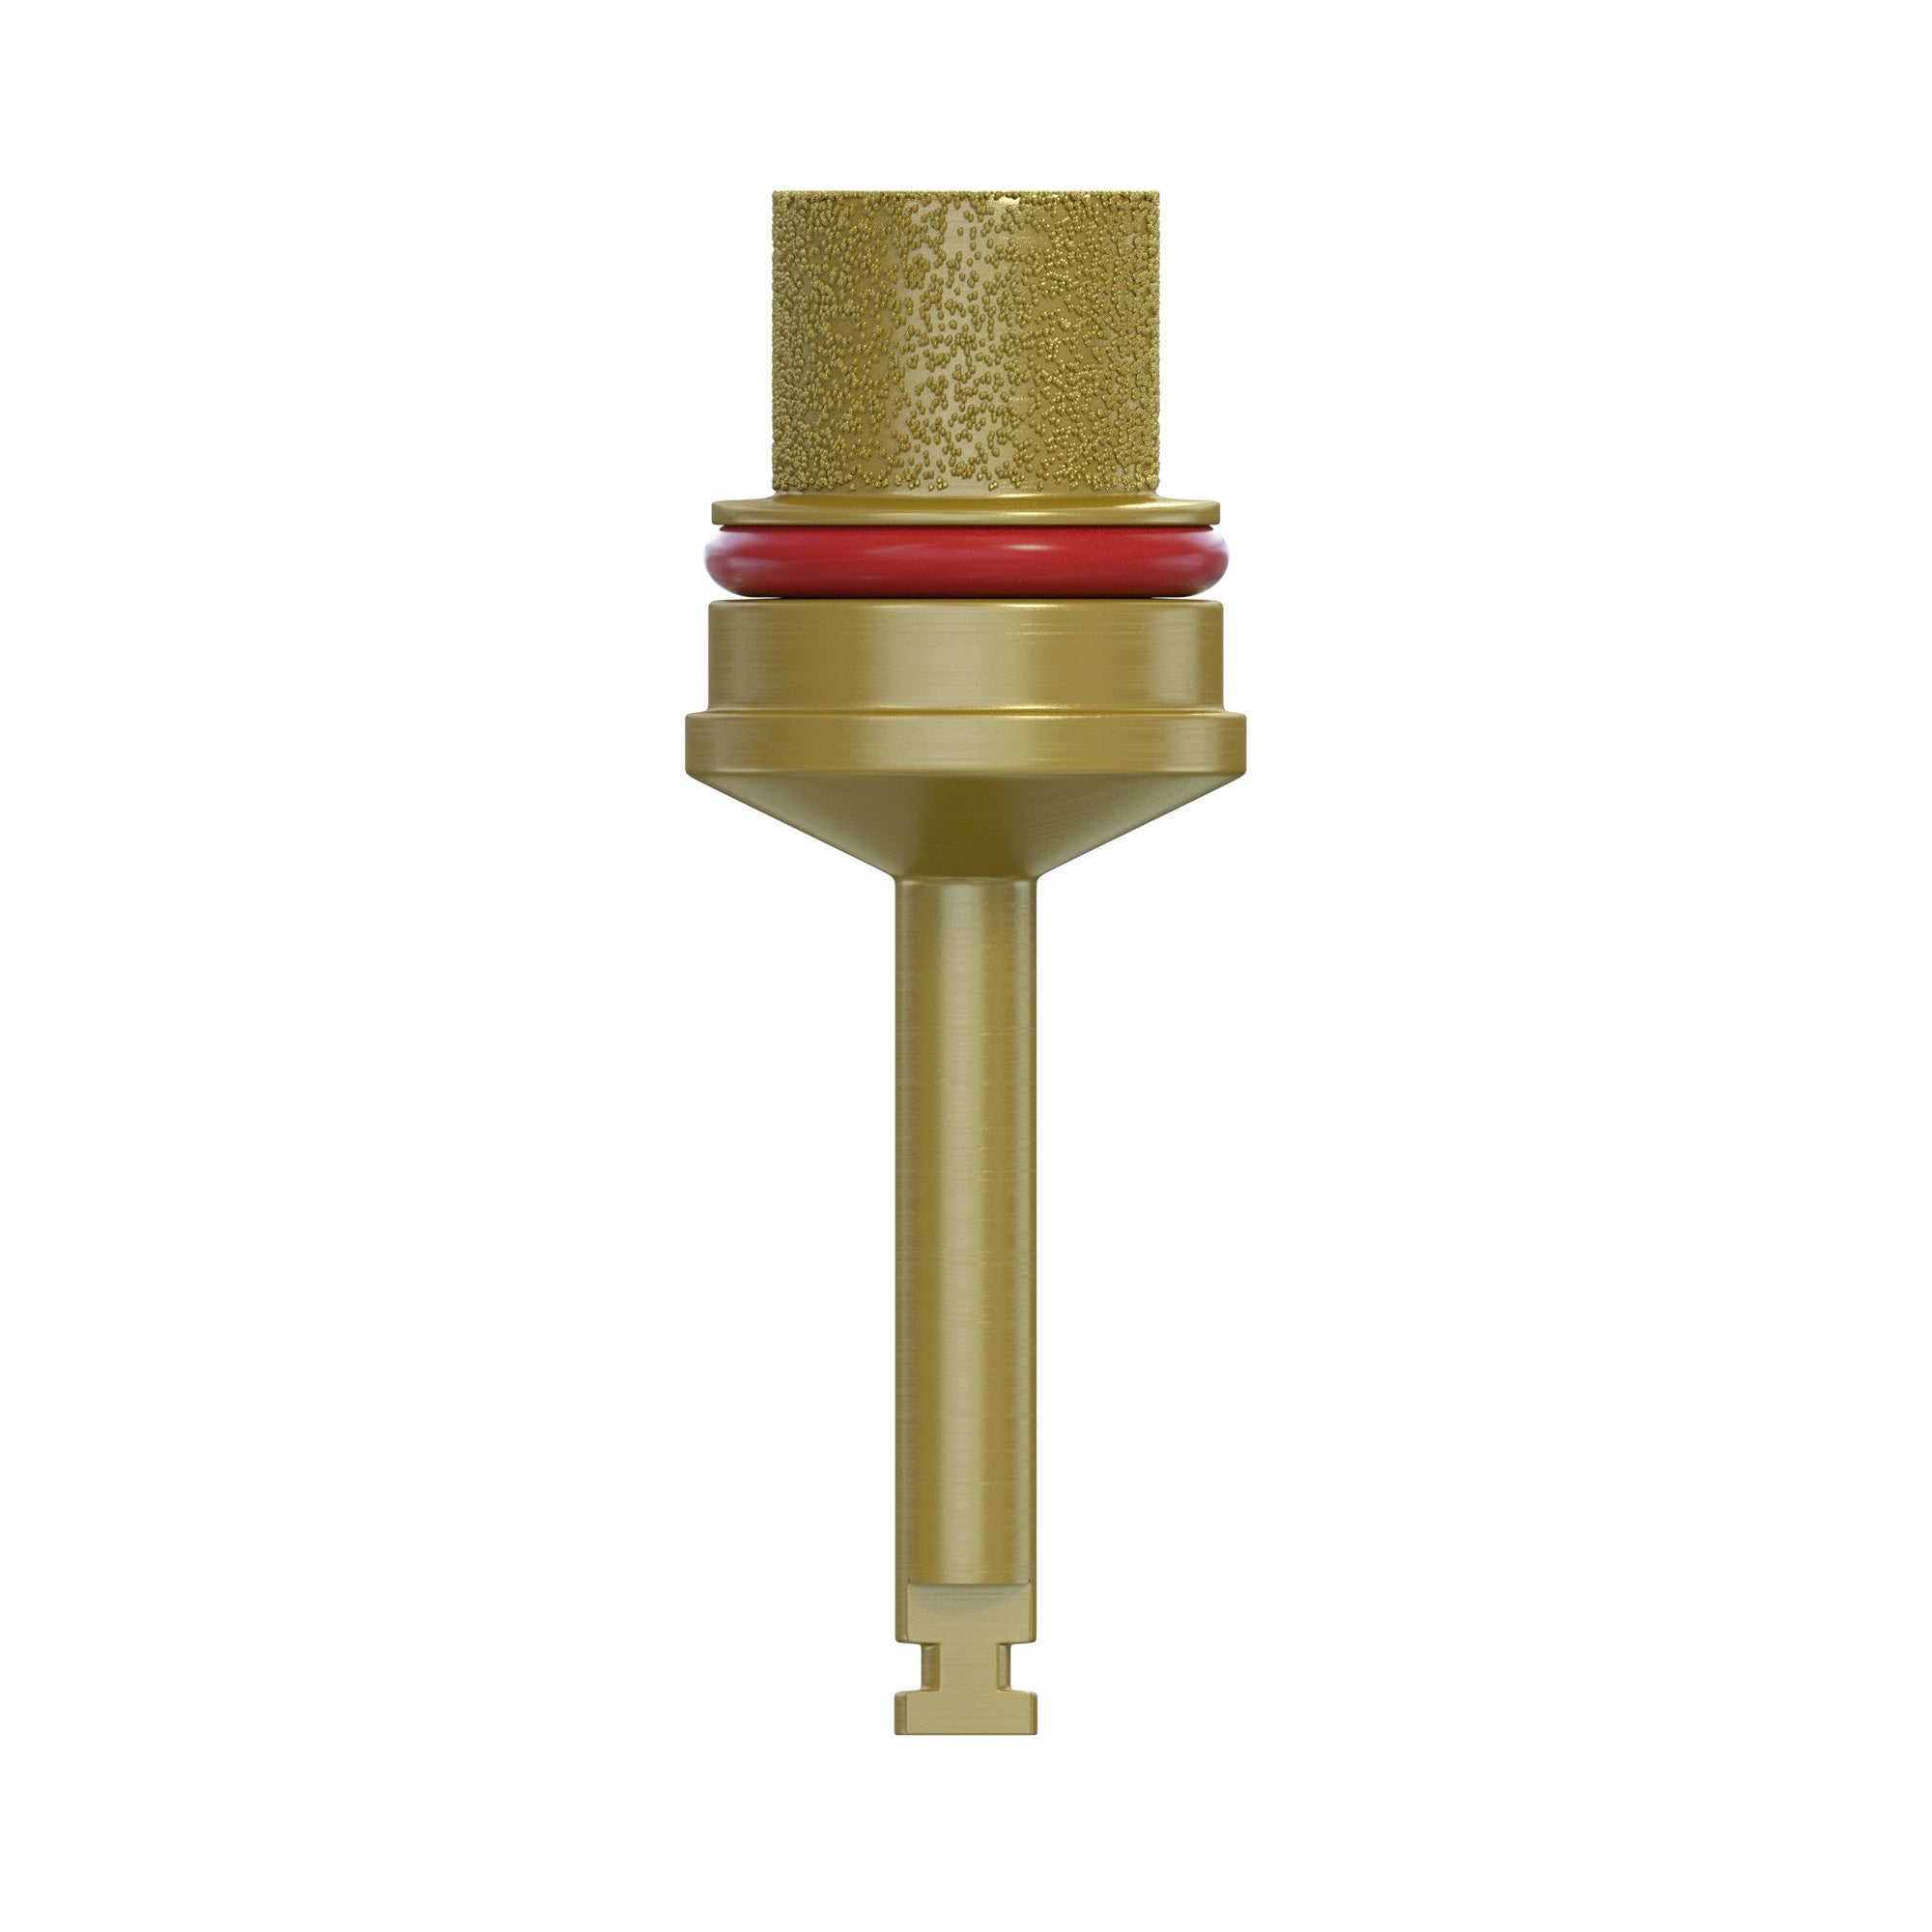 DSI Lateral Approach Core Drill For Sinus Lifting "LACD Drill"